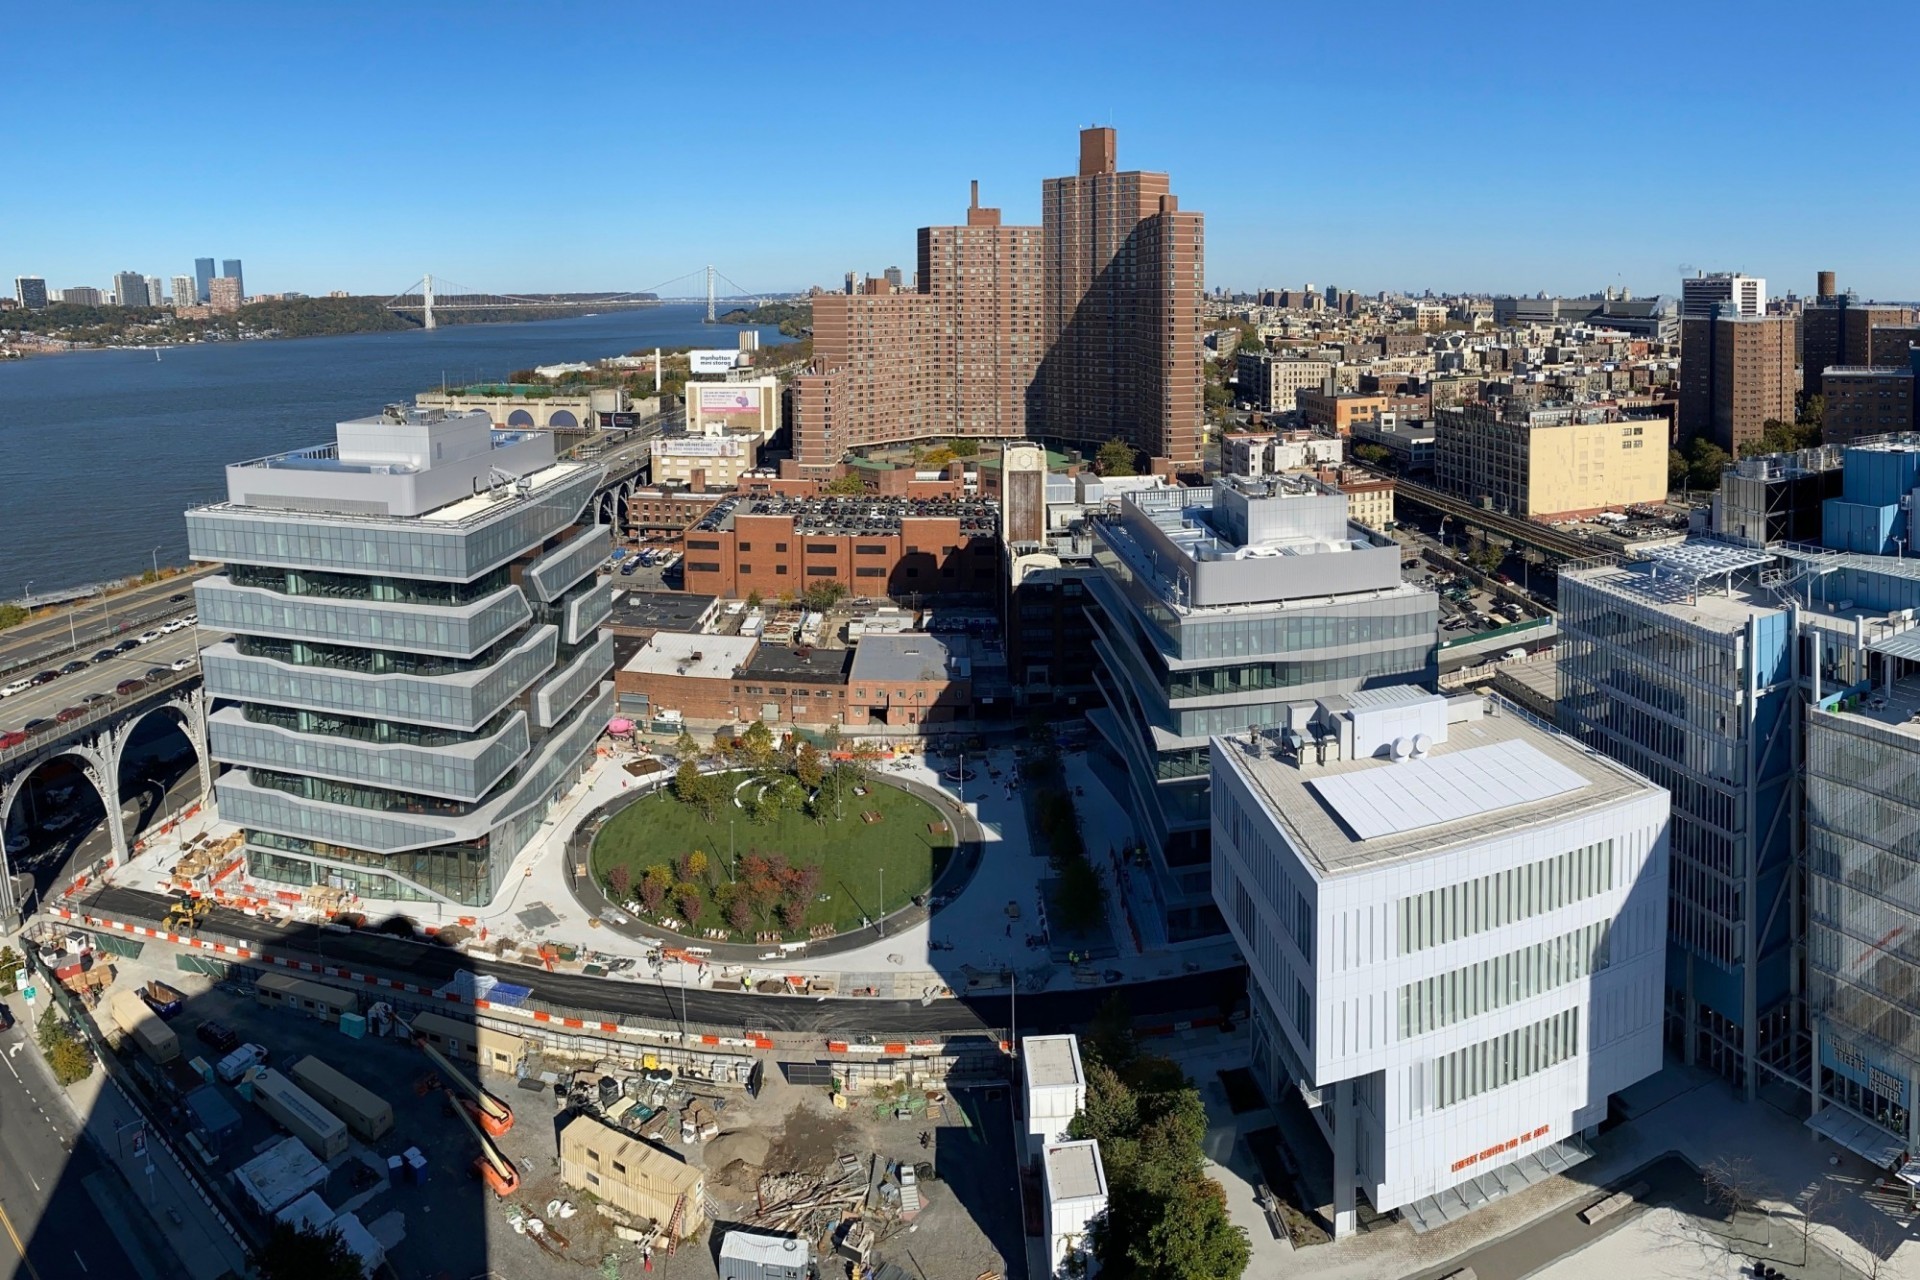 An aerial shot of the Manhattanville campus with a fish-eye lens, showing the Lenfest Center for the Arts, the Square, and the Business School.